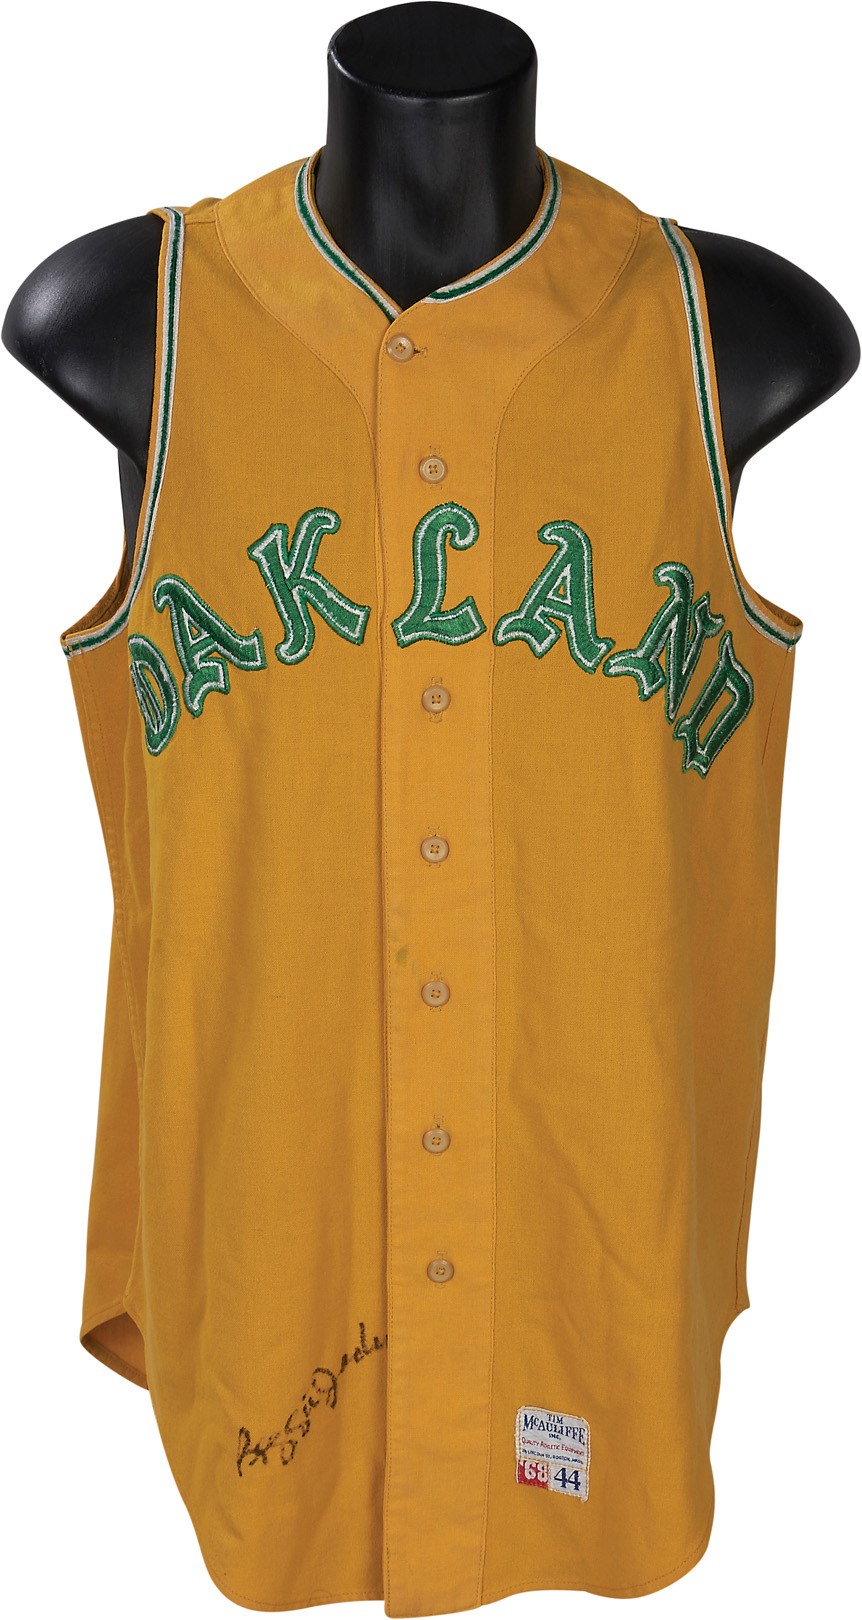 - 1968 Reggie Jackson Oakland A's Game Worn Signed Rookie Jersey (MEARS 10)